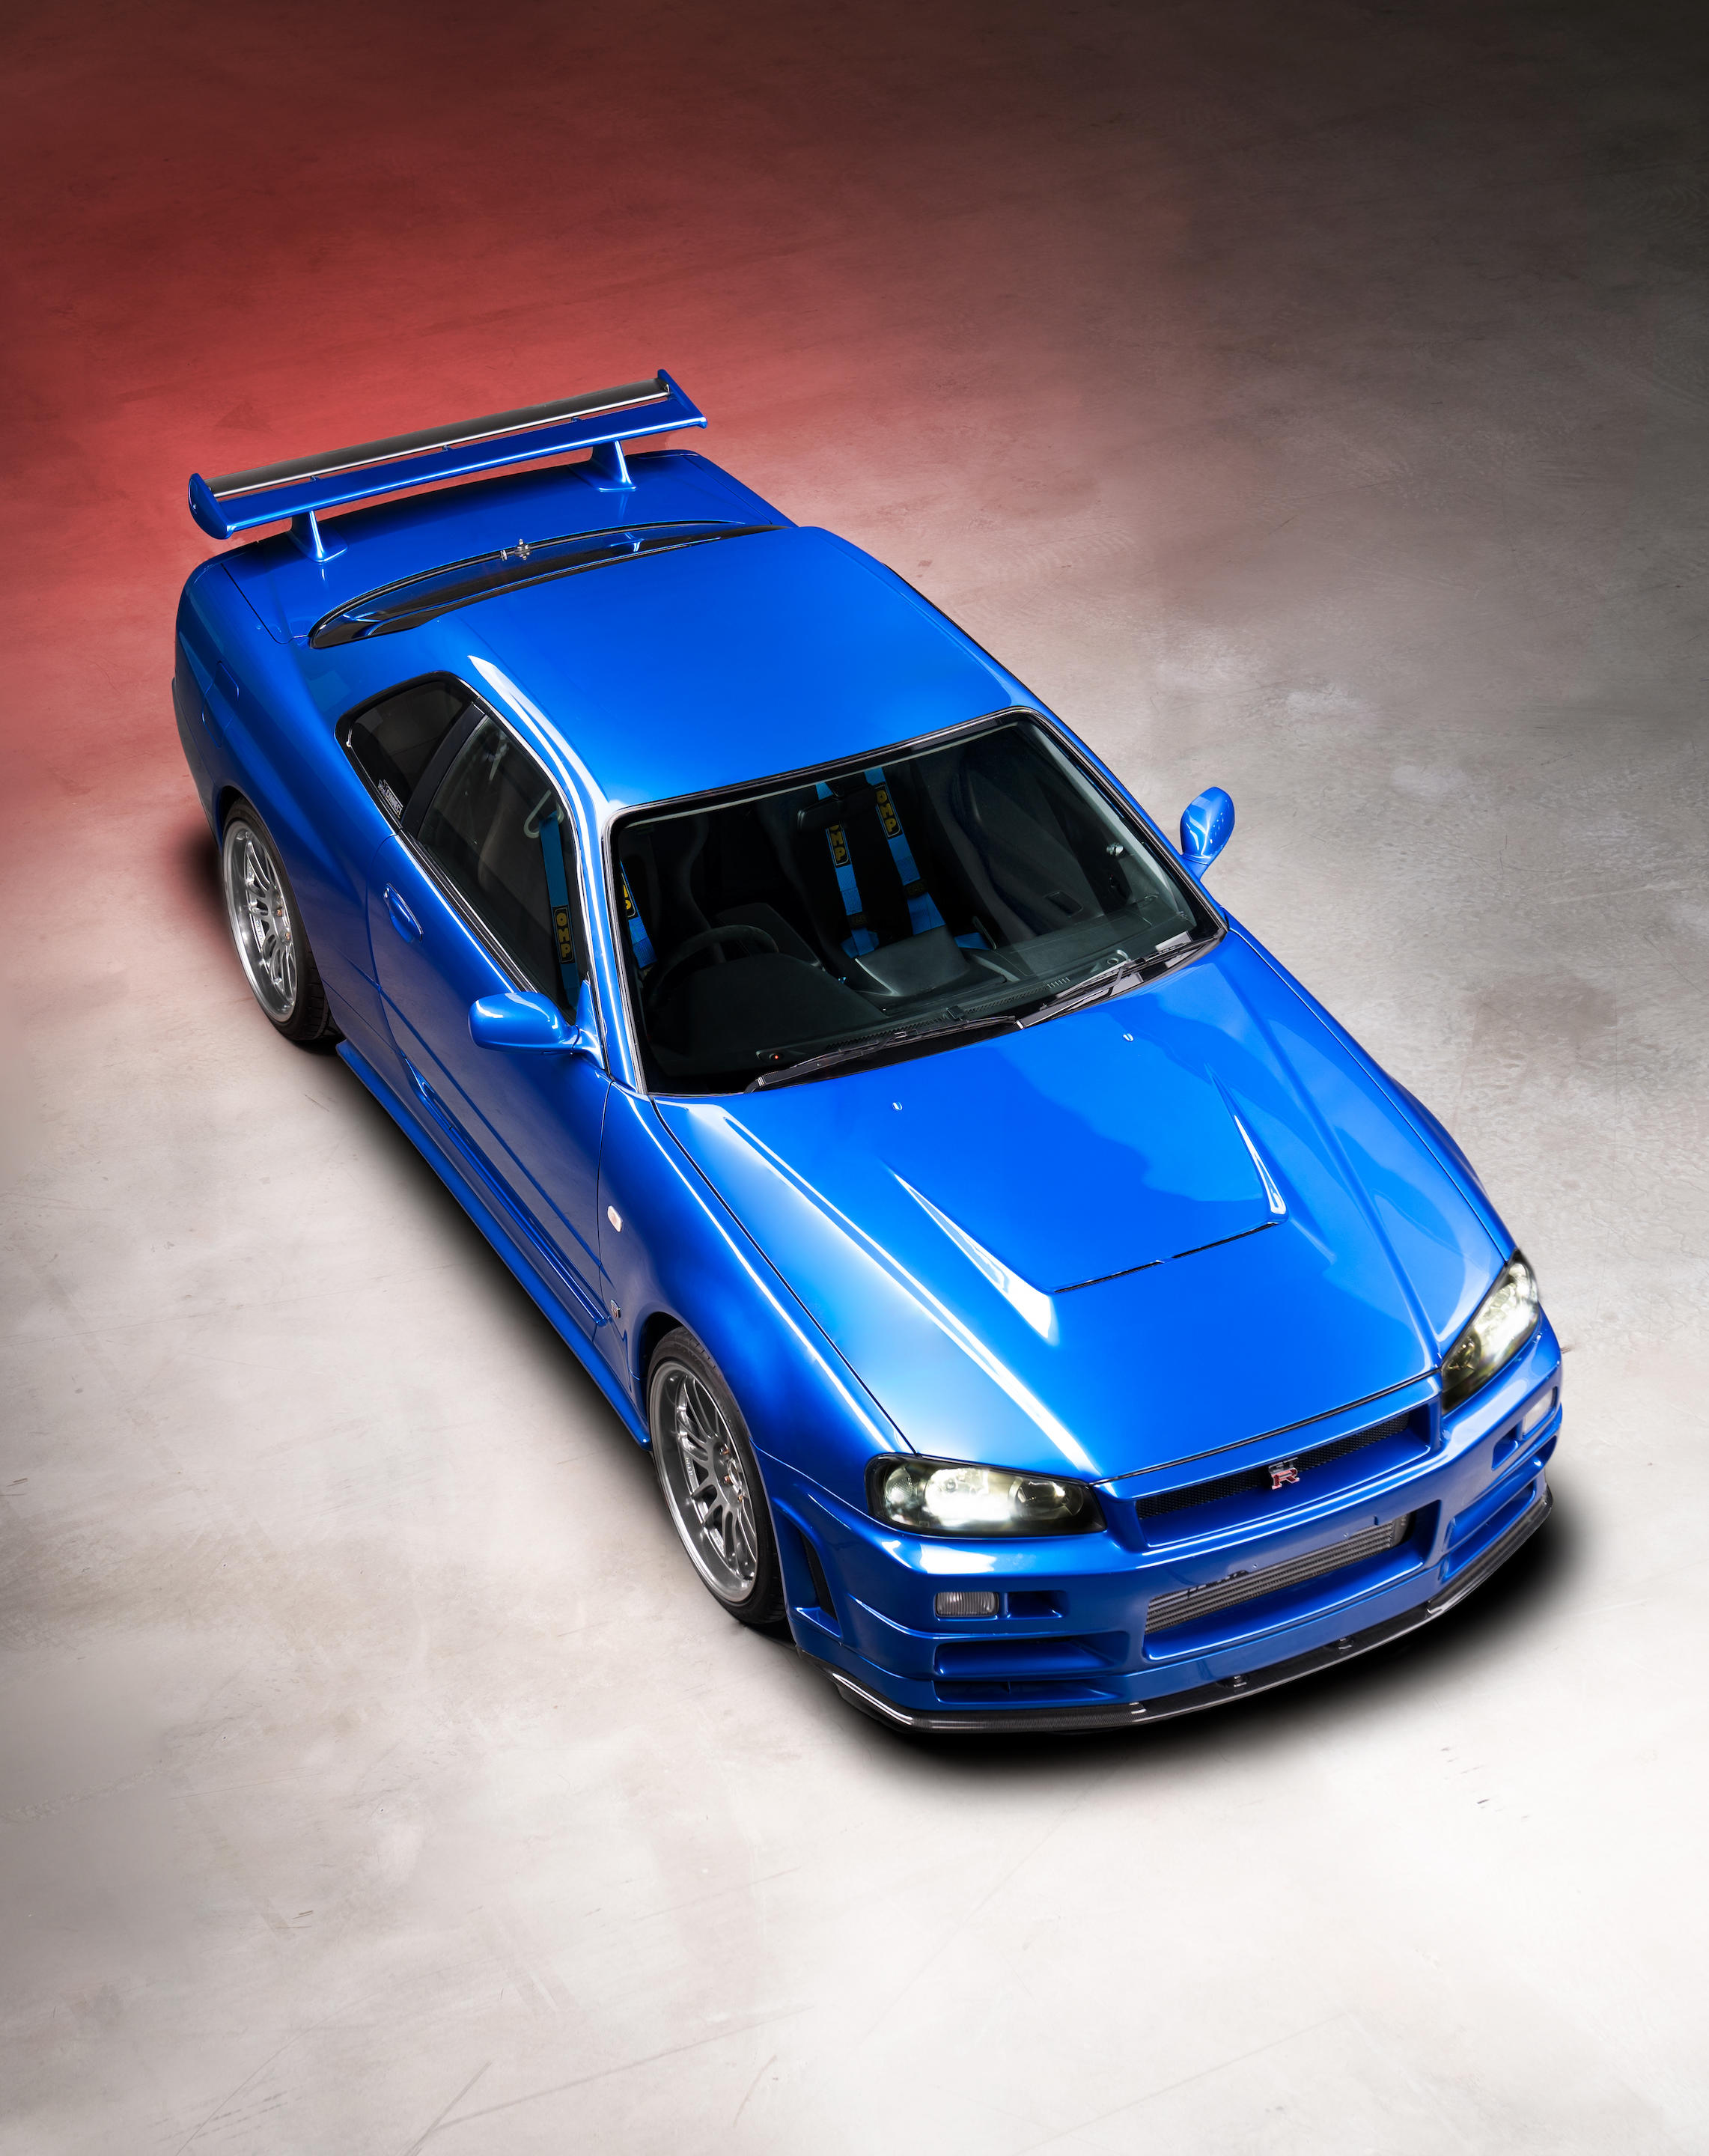 Driven by Paul Walker in Fast and Furious, Nissan Skyline R34 GT-R by Kaizo  - Bonhams